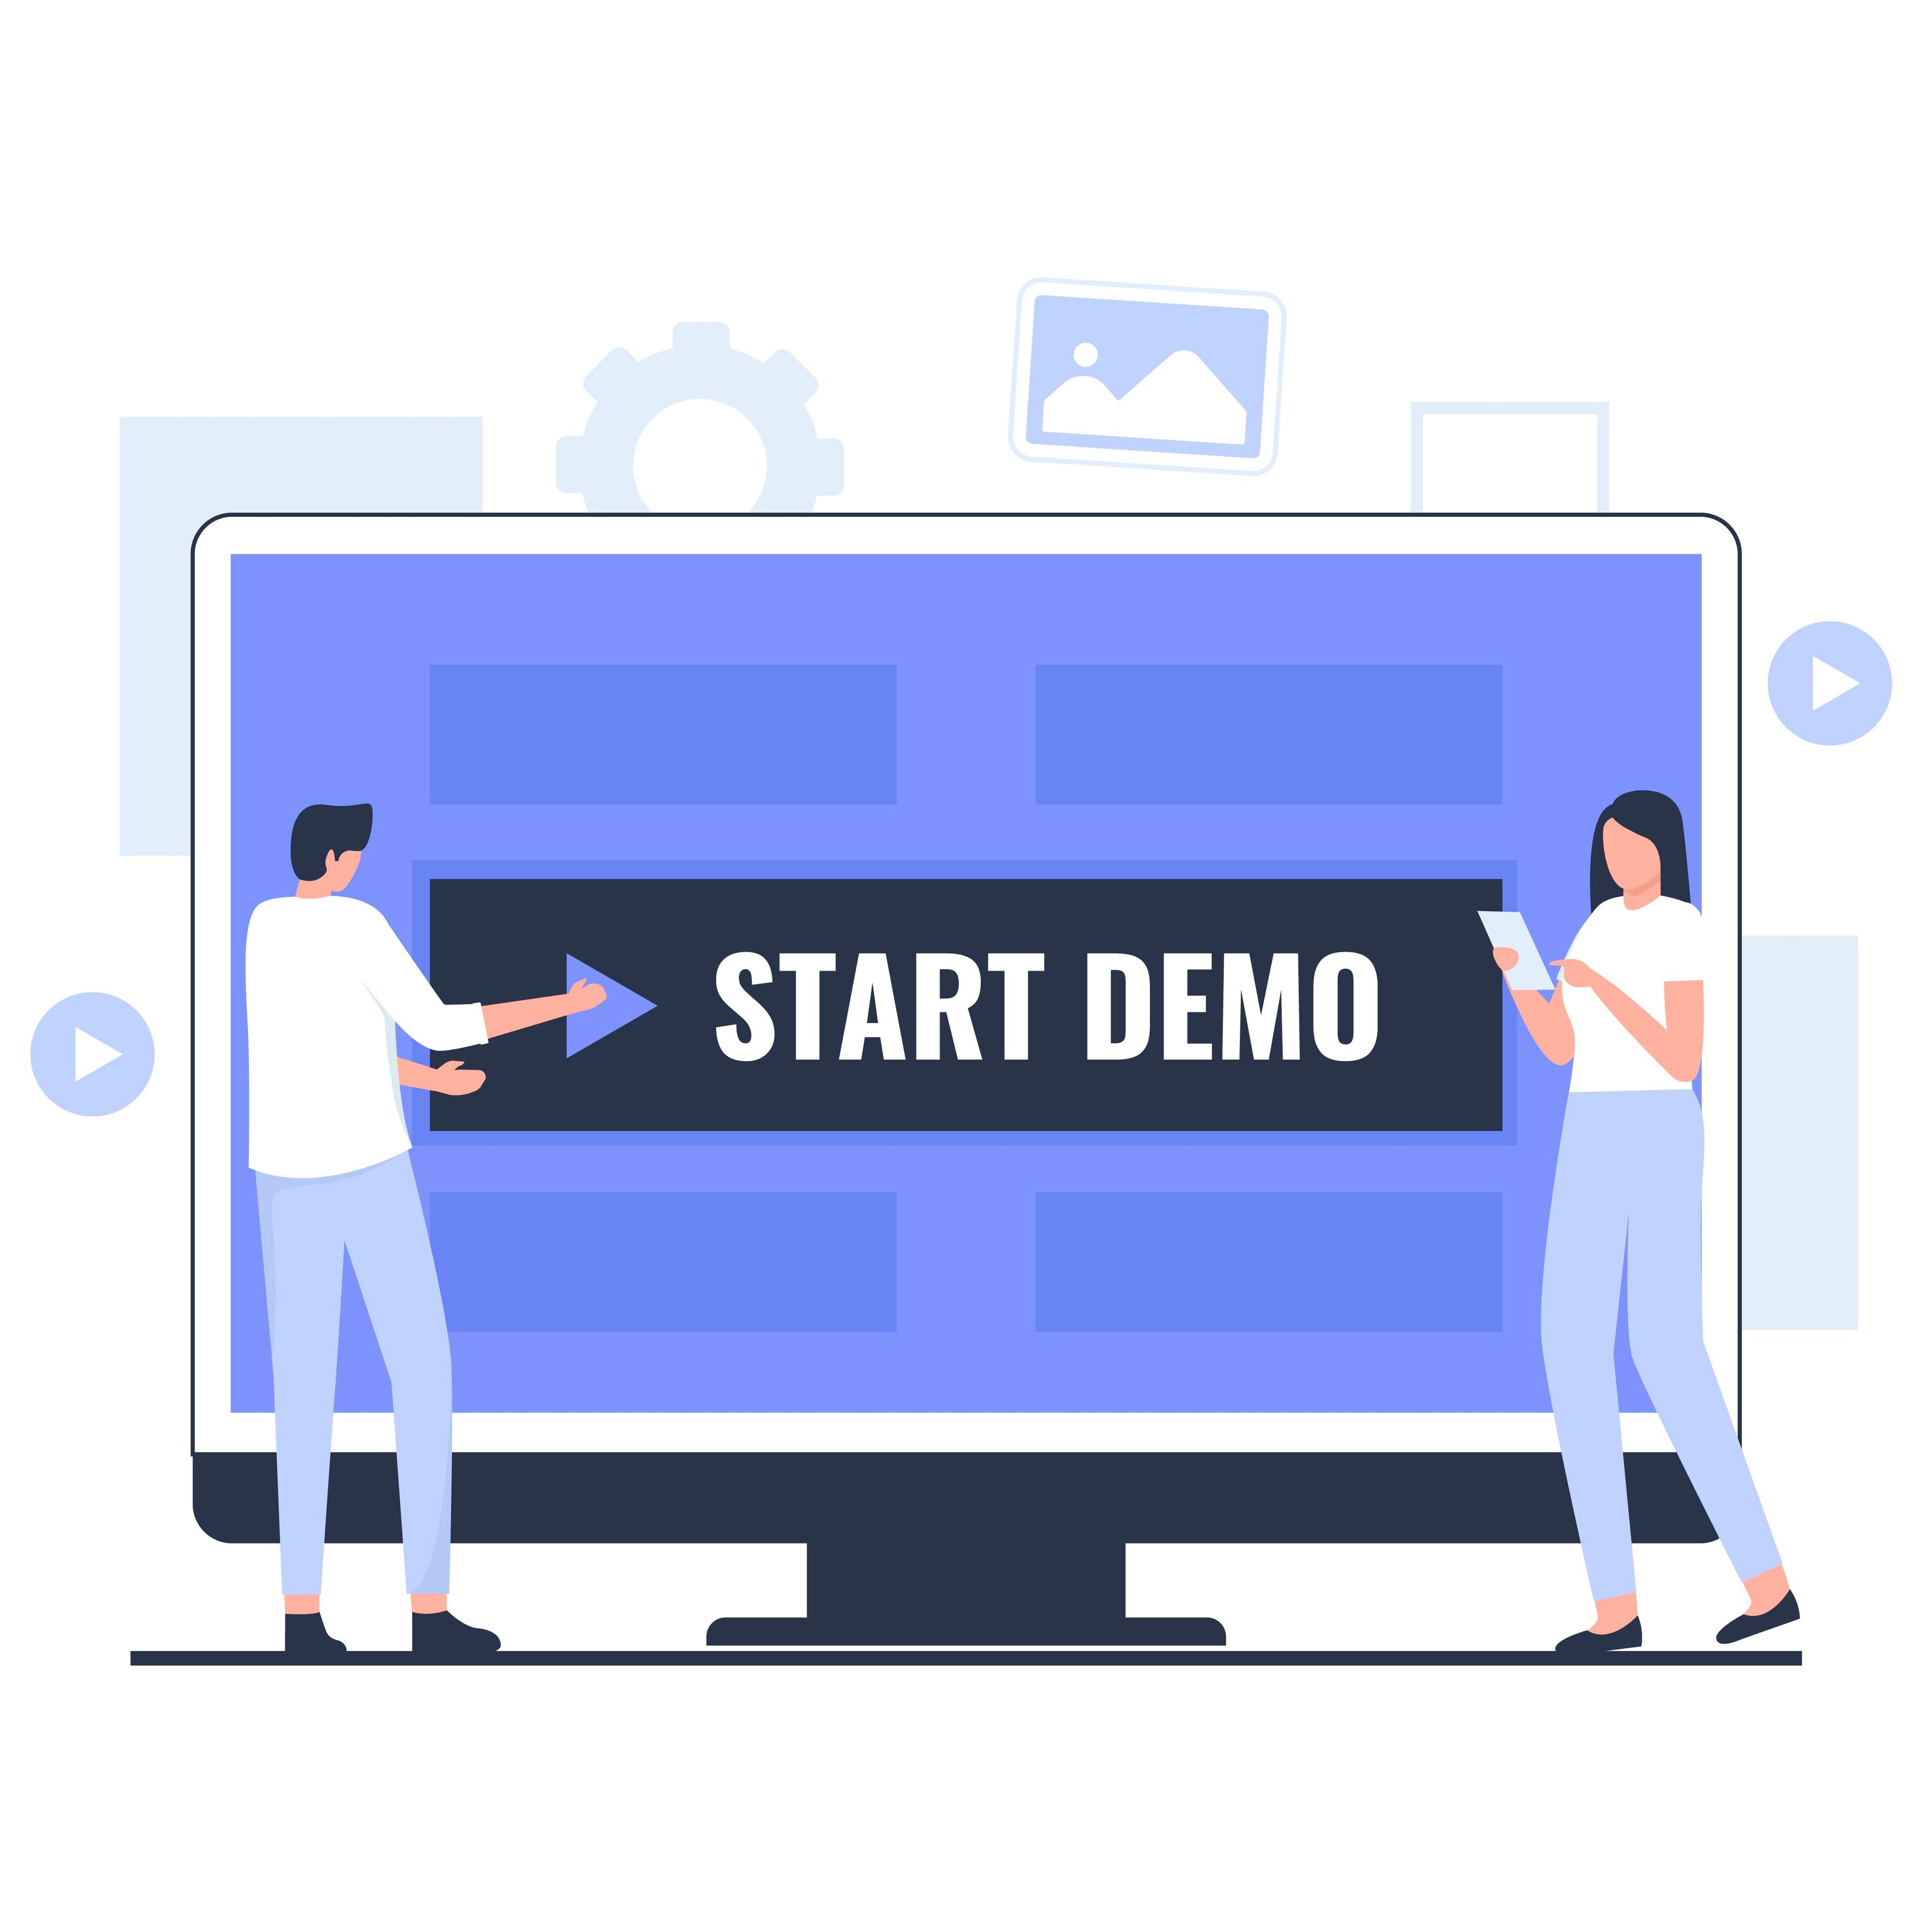 Healthcare Marketing Strategy: How to Make Your Demo Page Convert